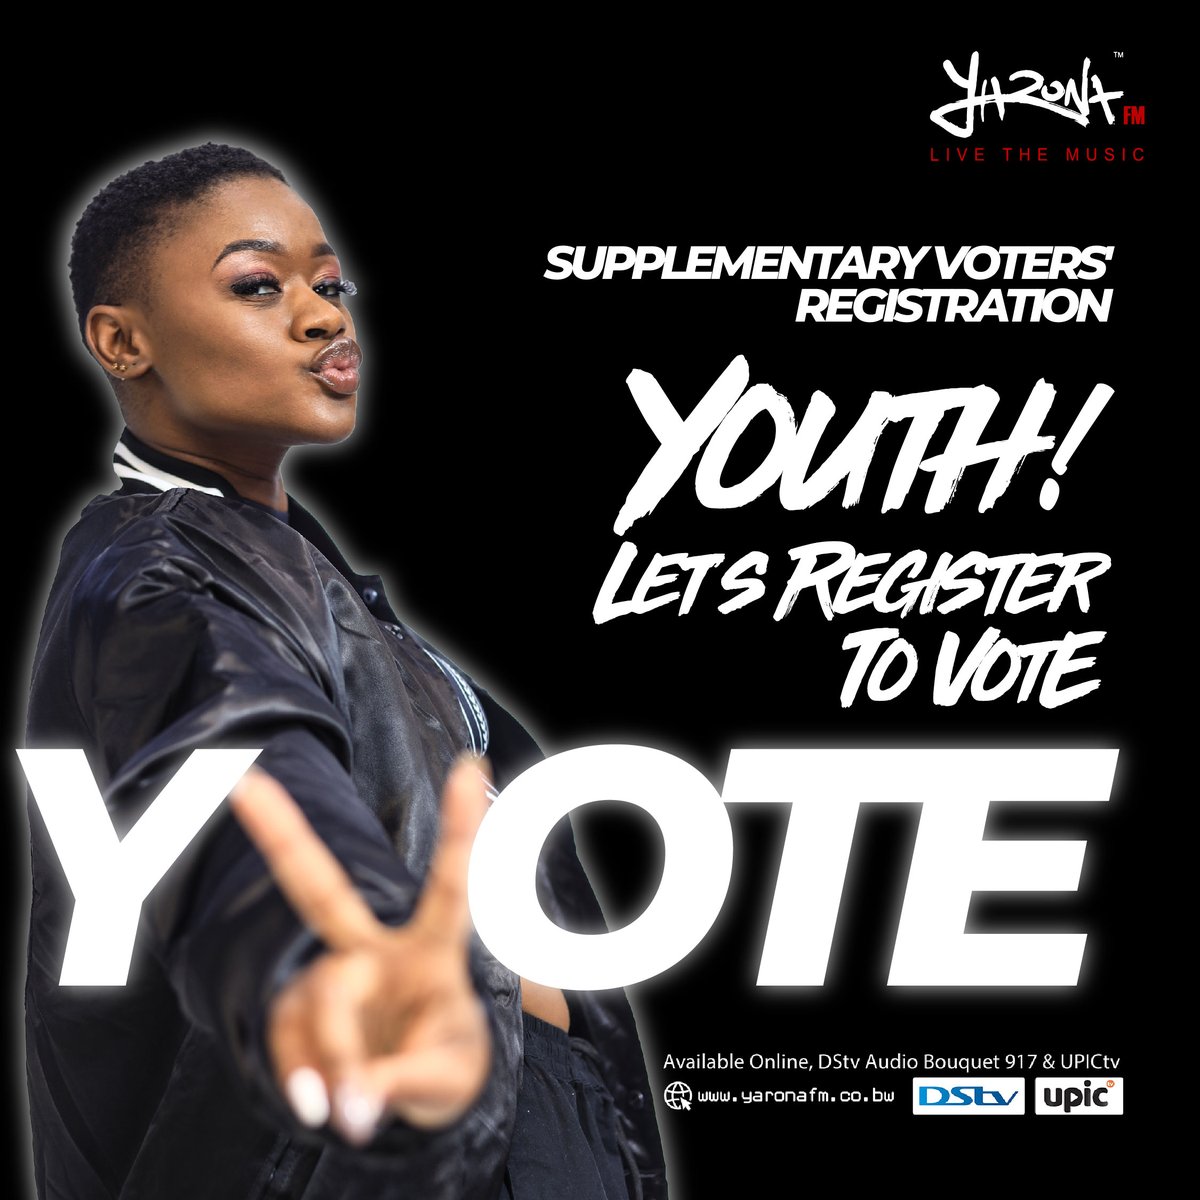 Your Vote, Your Right, Your Responsibility! 🗳️ Register Now! Final day, make it count, fam. #YVOTE #YouthInAction #YaronaFM #25ActsOfKindness #CuddleUpLeRona #Y30Chart